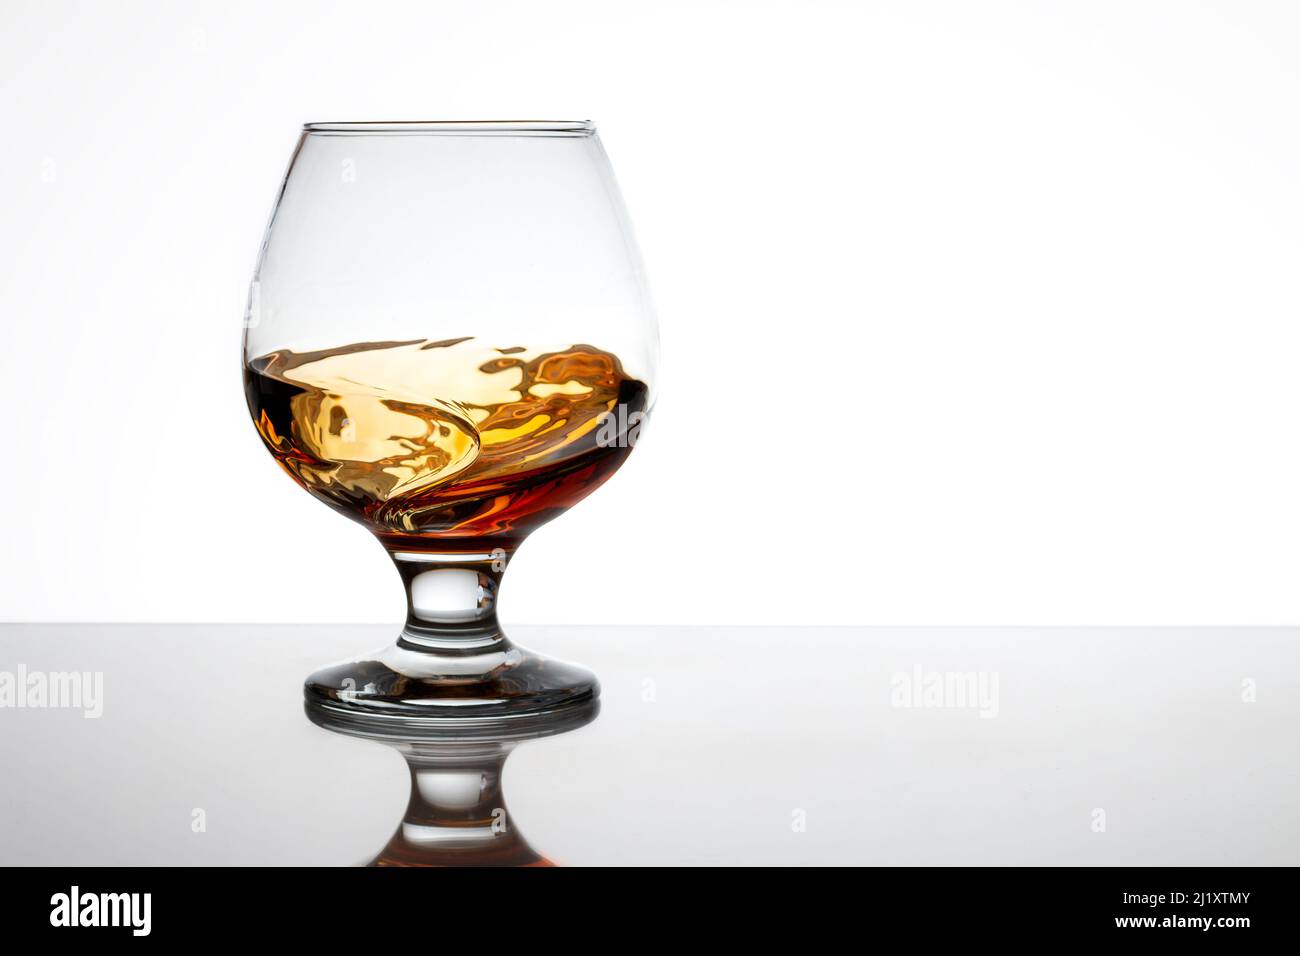 A glass of brandy in movement, which forms very attractive waves. The background is white and the base of the glass is reflected on the surface. Stock Photo